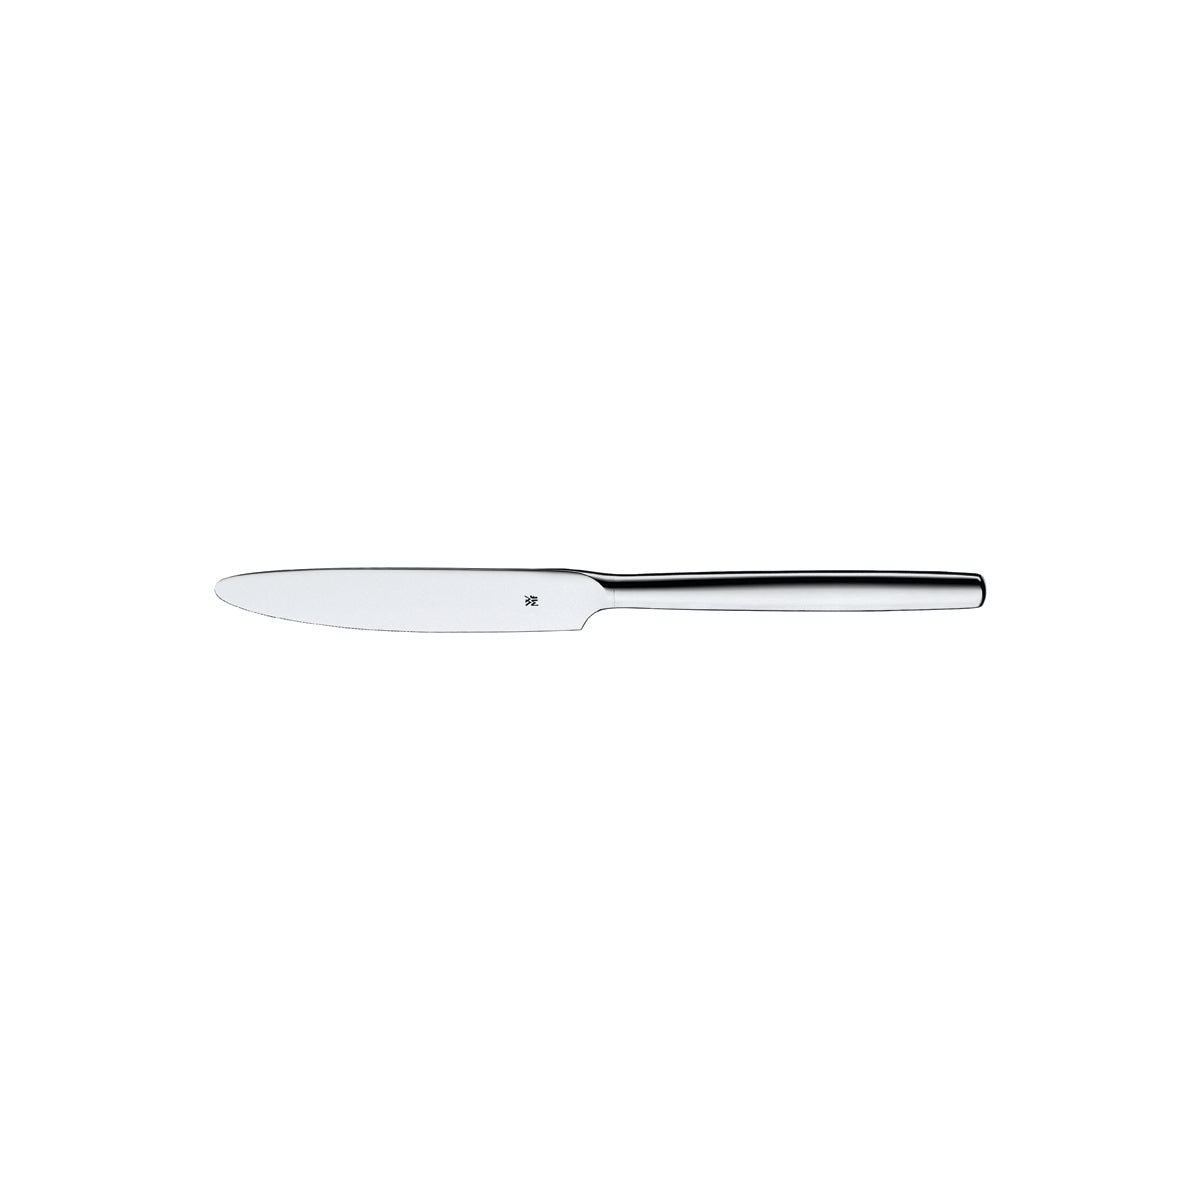 11.0403.6047 WMF Bistro Table Knife - Hollow Handle Stainless Steel Tomkin Australia Hospitality Supplies